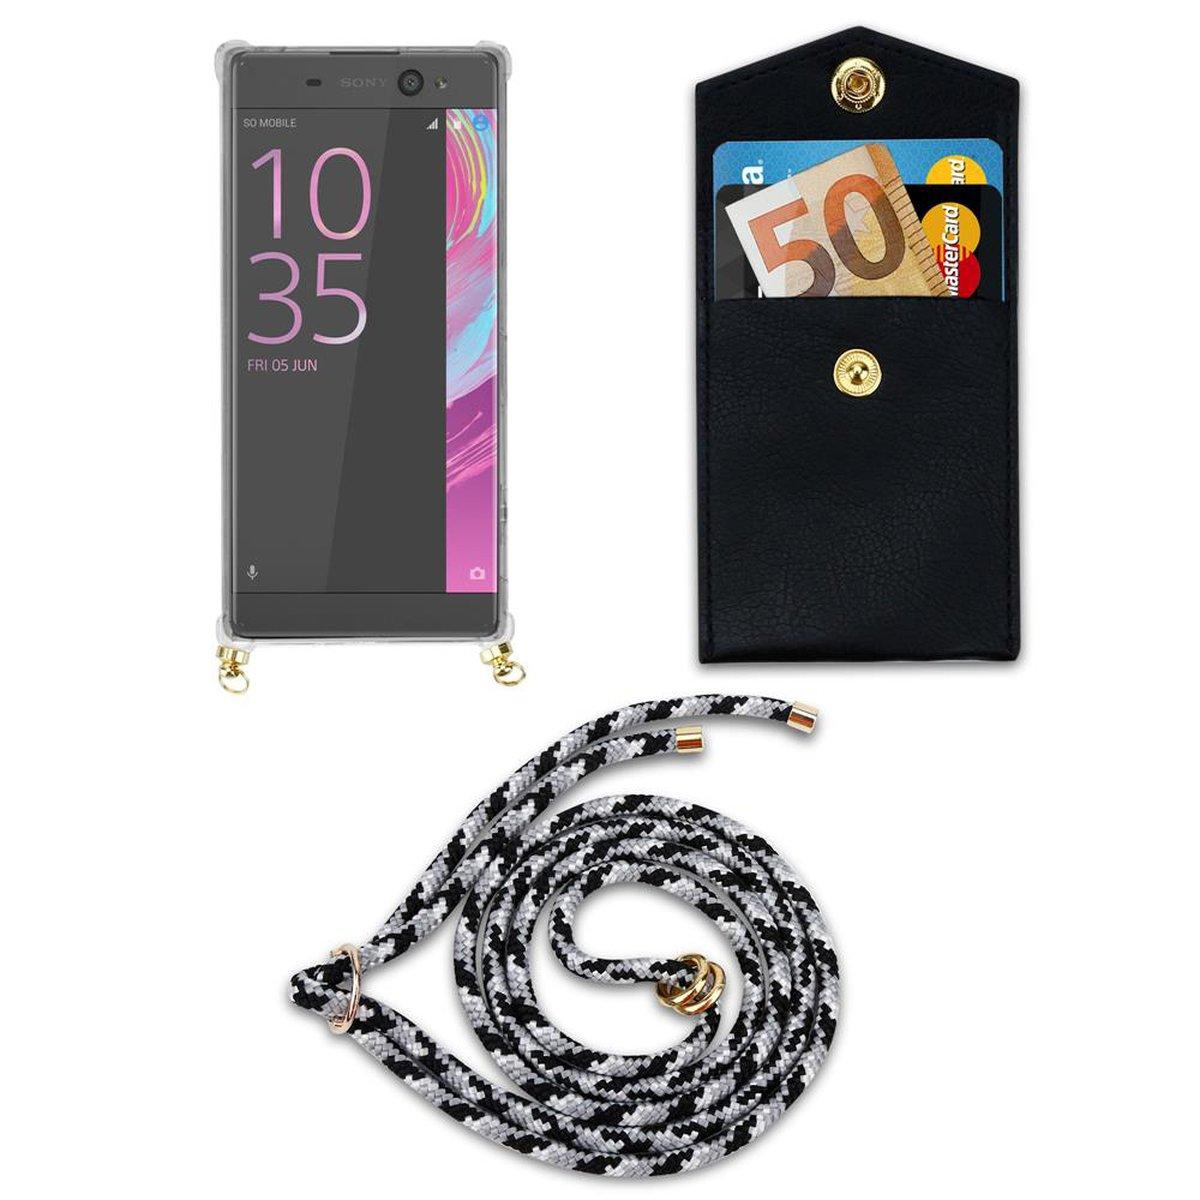 CADORABO Handy Kette mit Backcover, Kordel Hülle, SCHWARZ Xperia Sony, Gold XA, Band abnehmbarer CAMOUFLAGE und Ringen